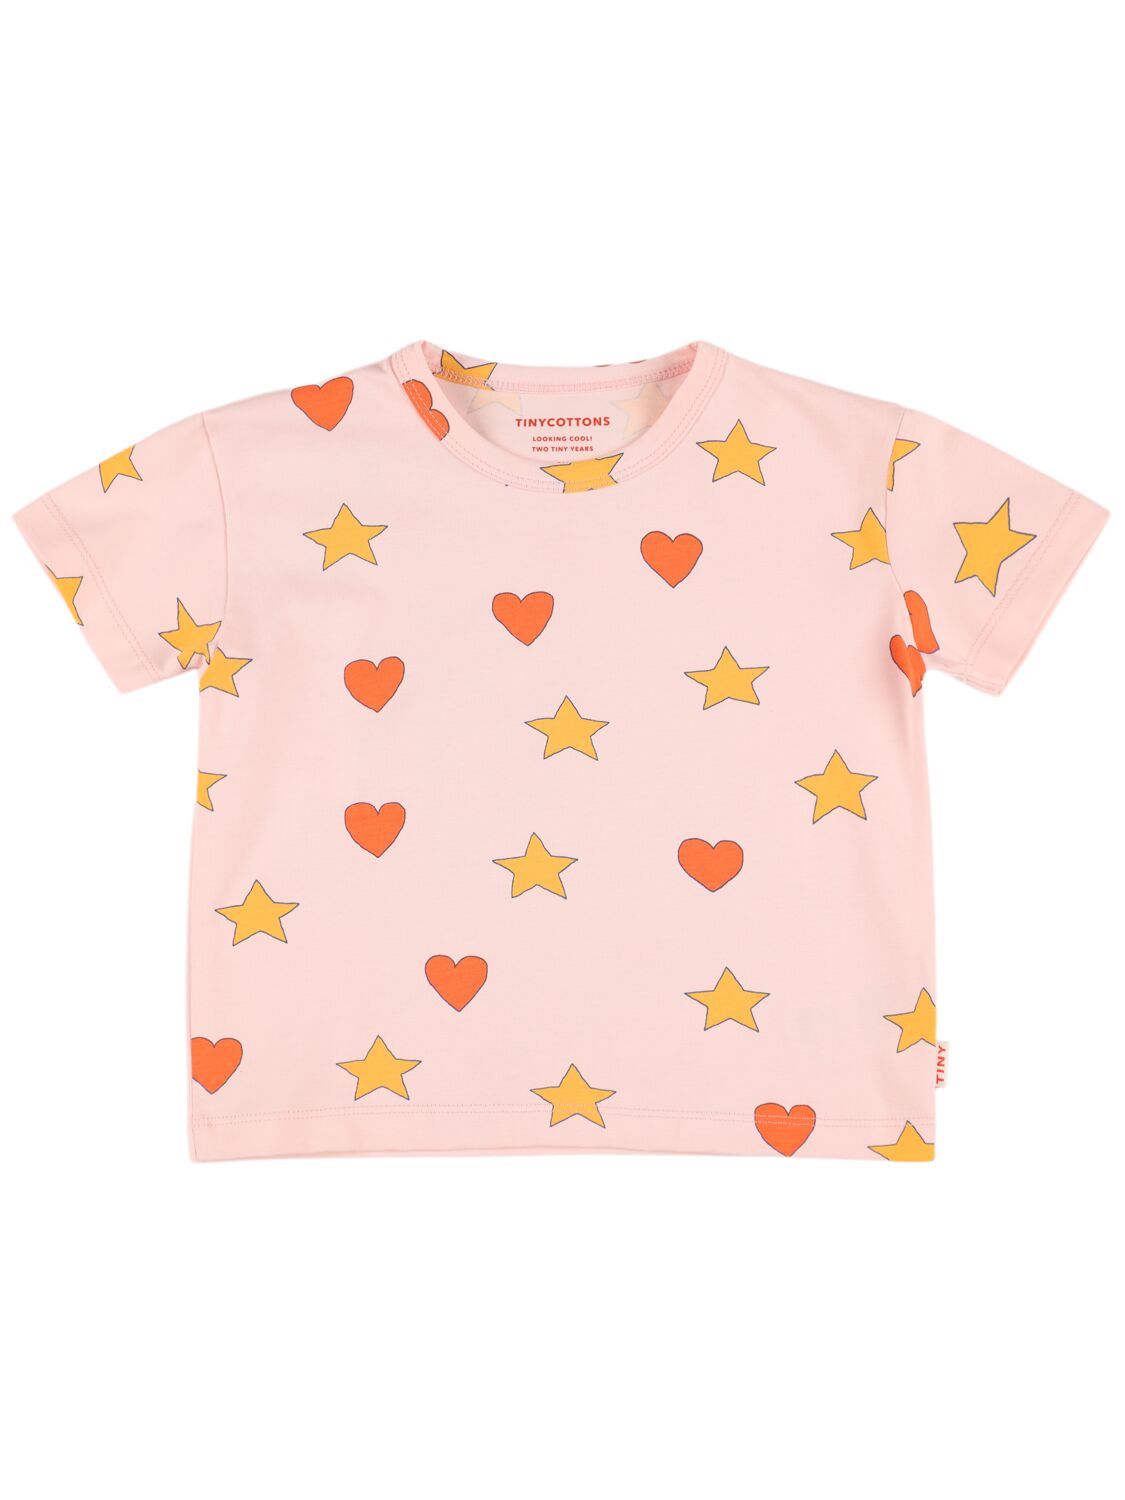 Tiny Cottons Kids' Printed Pima Cotton T-shirt In Pink